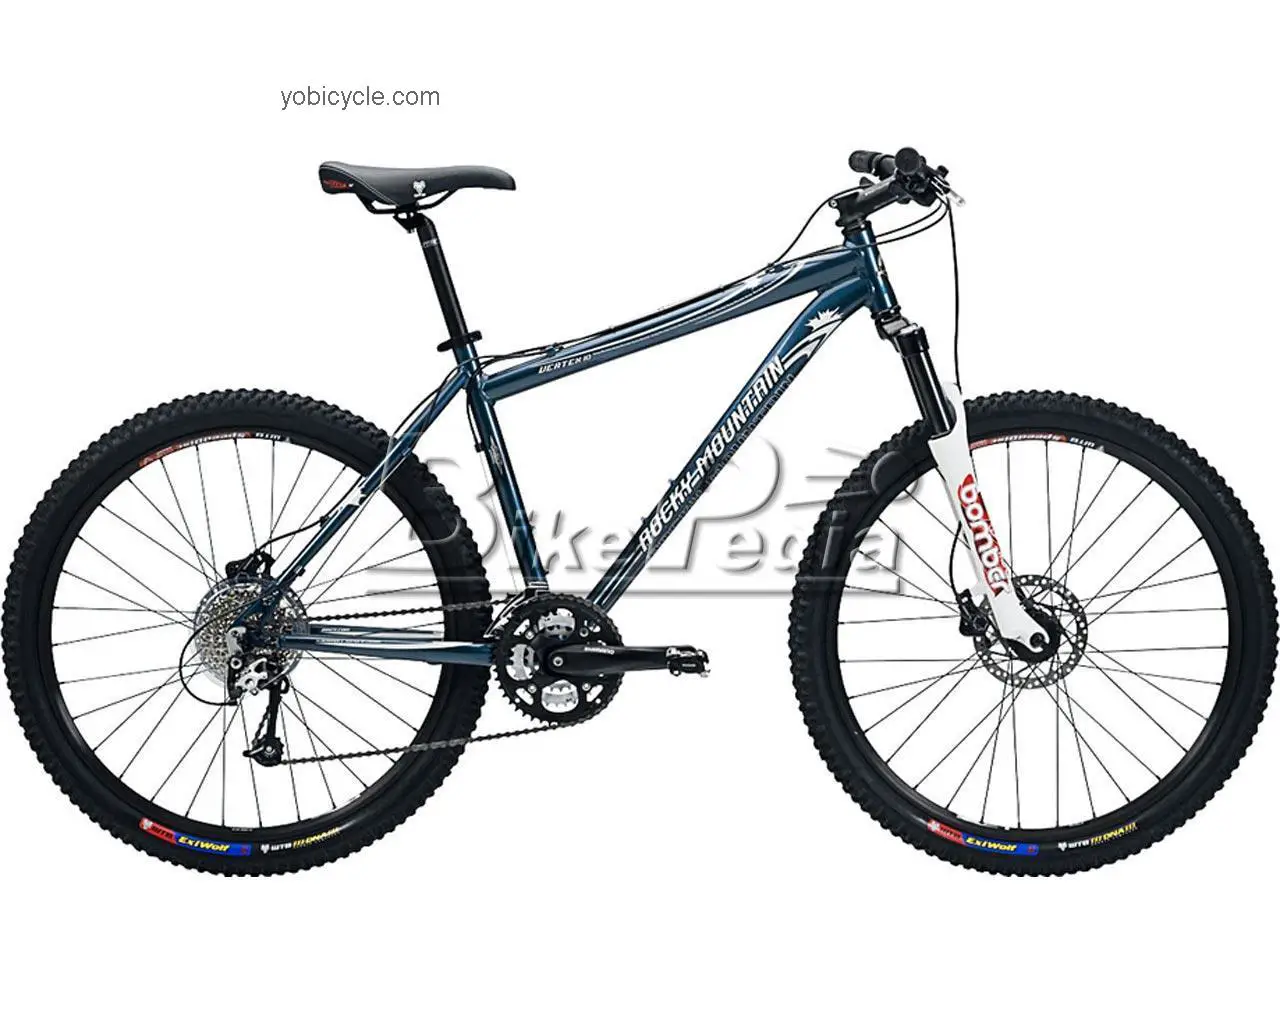 Rocky Mountain Vertex 10 2009 comparison online with competitors